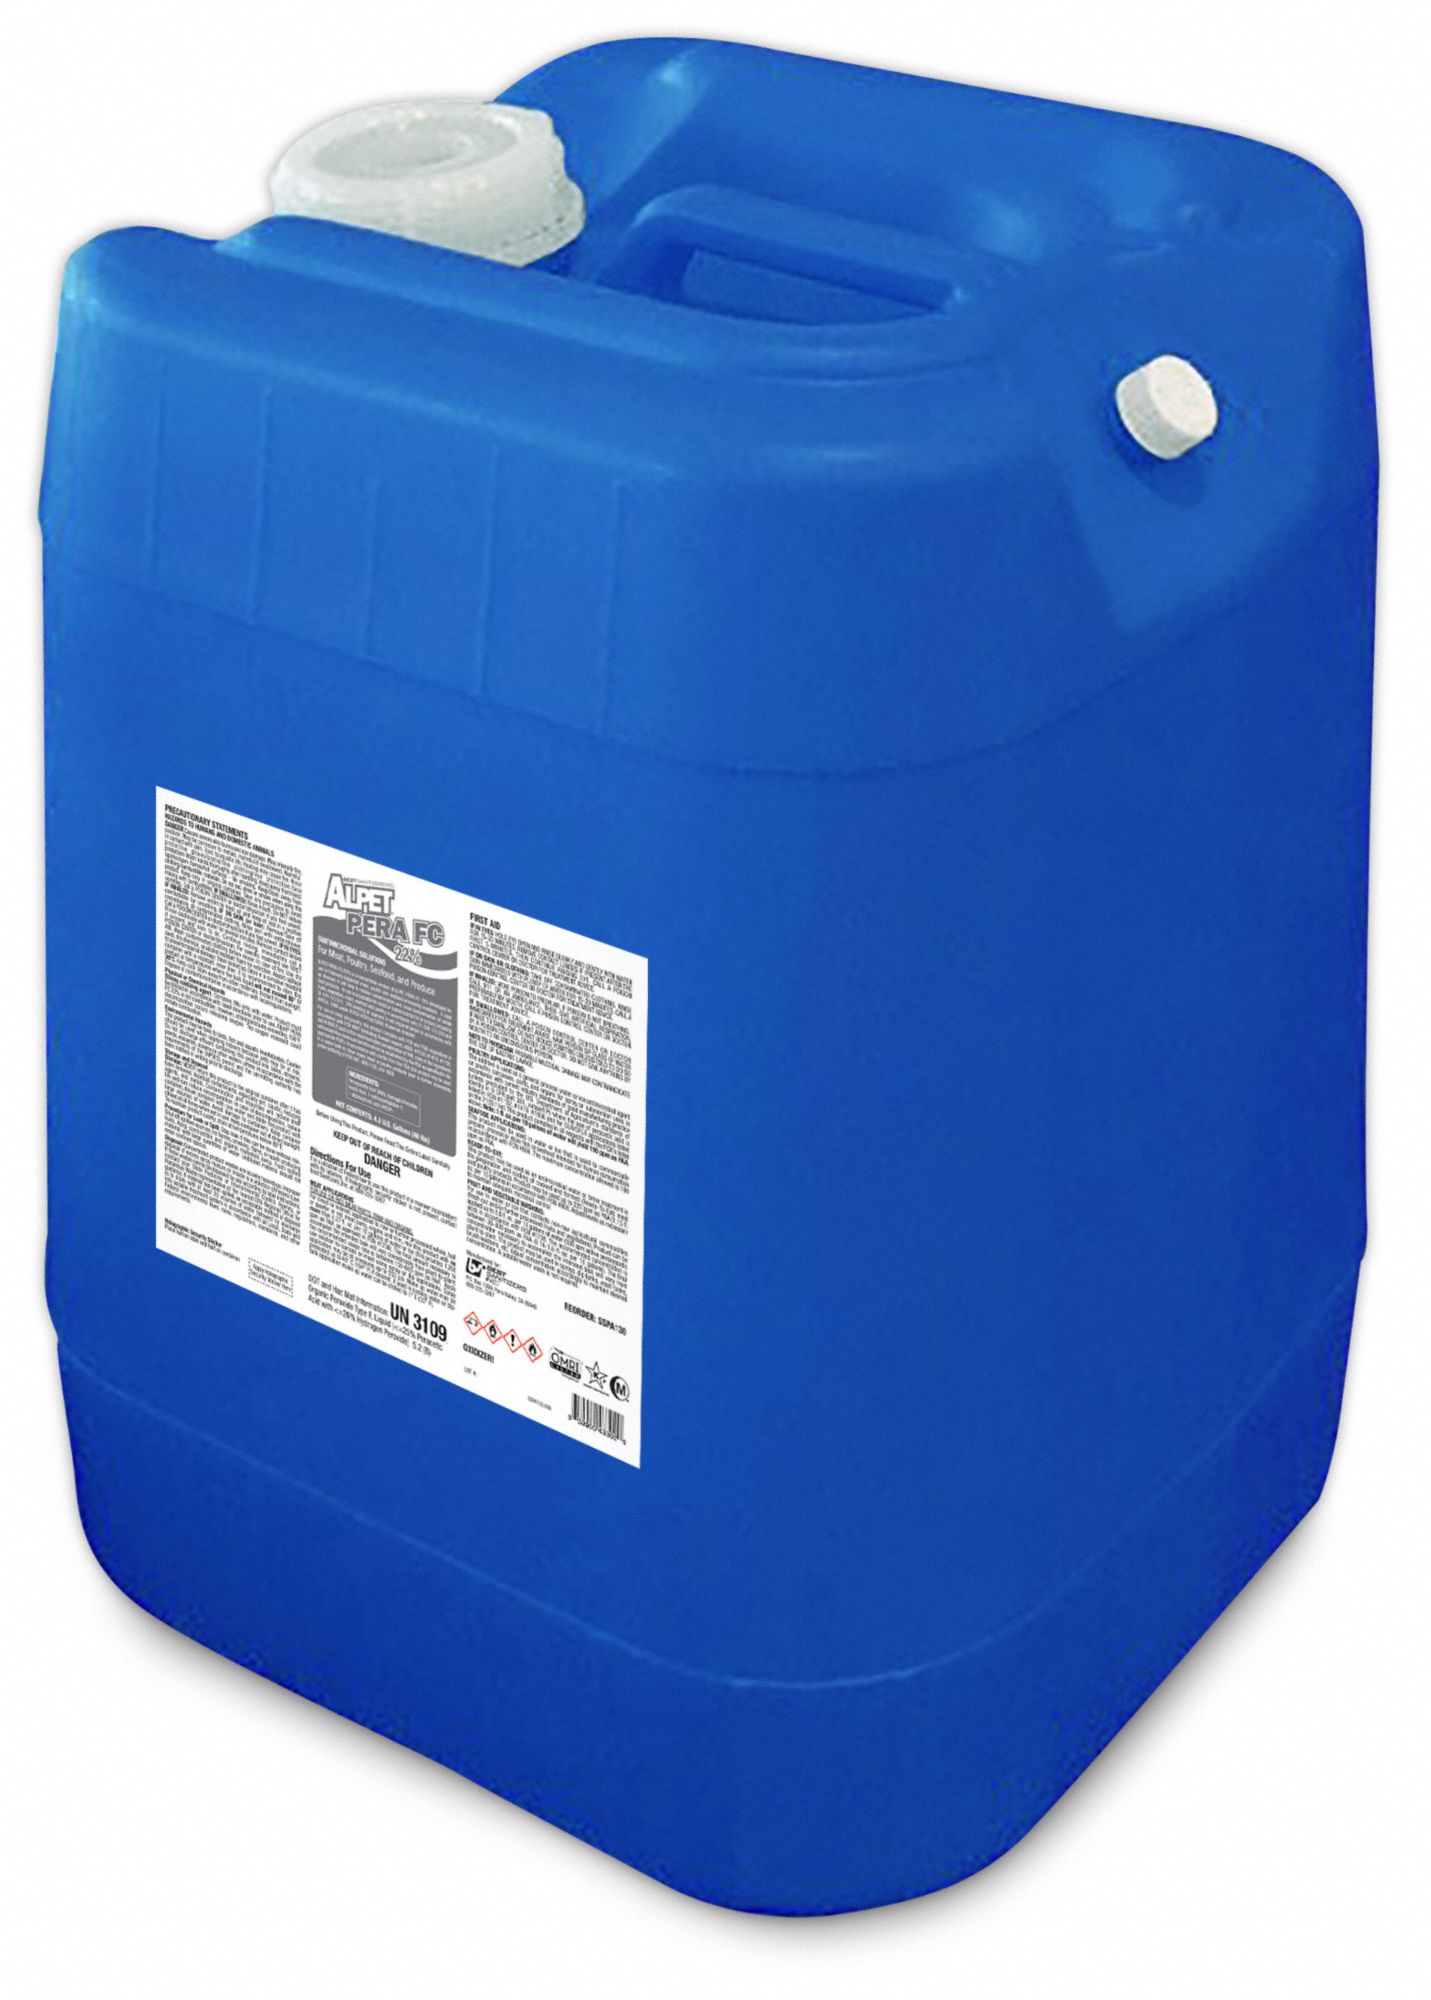 Antimicrobial Solution for Meat, Poultry, Seafood, and Produce: Jug, 4 gal Container Size